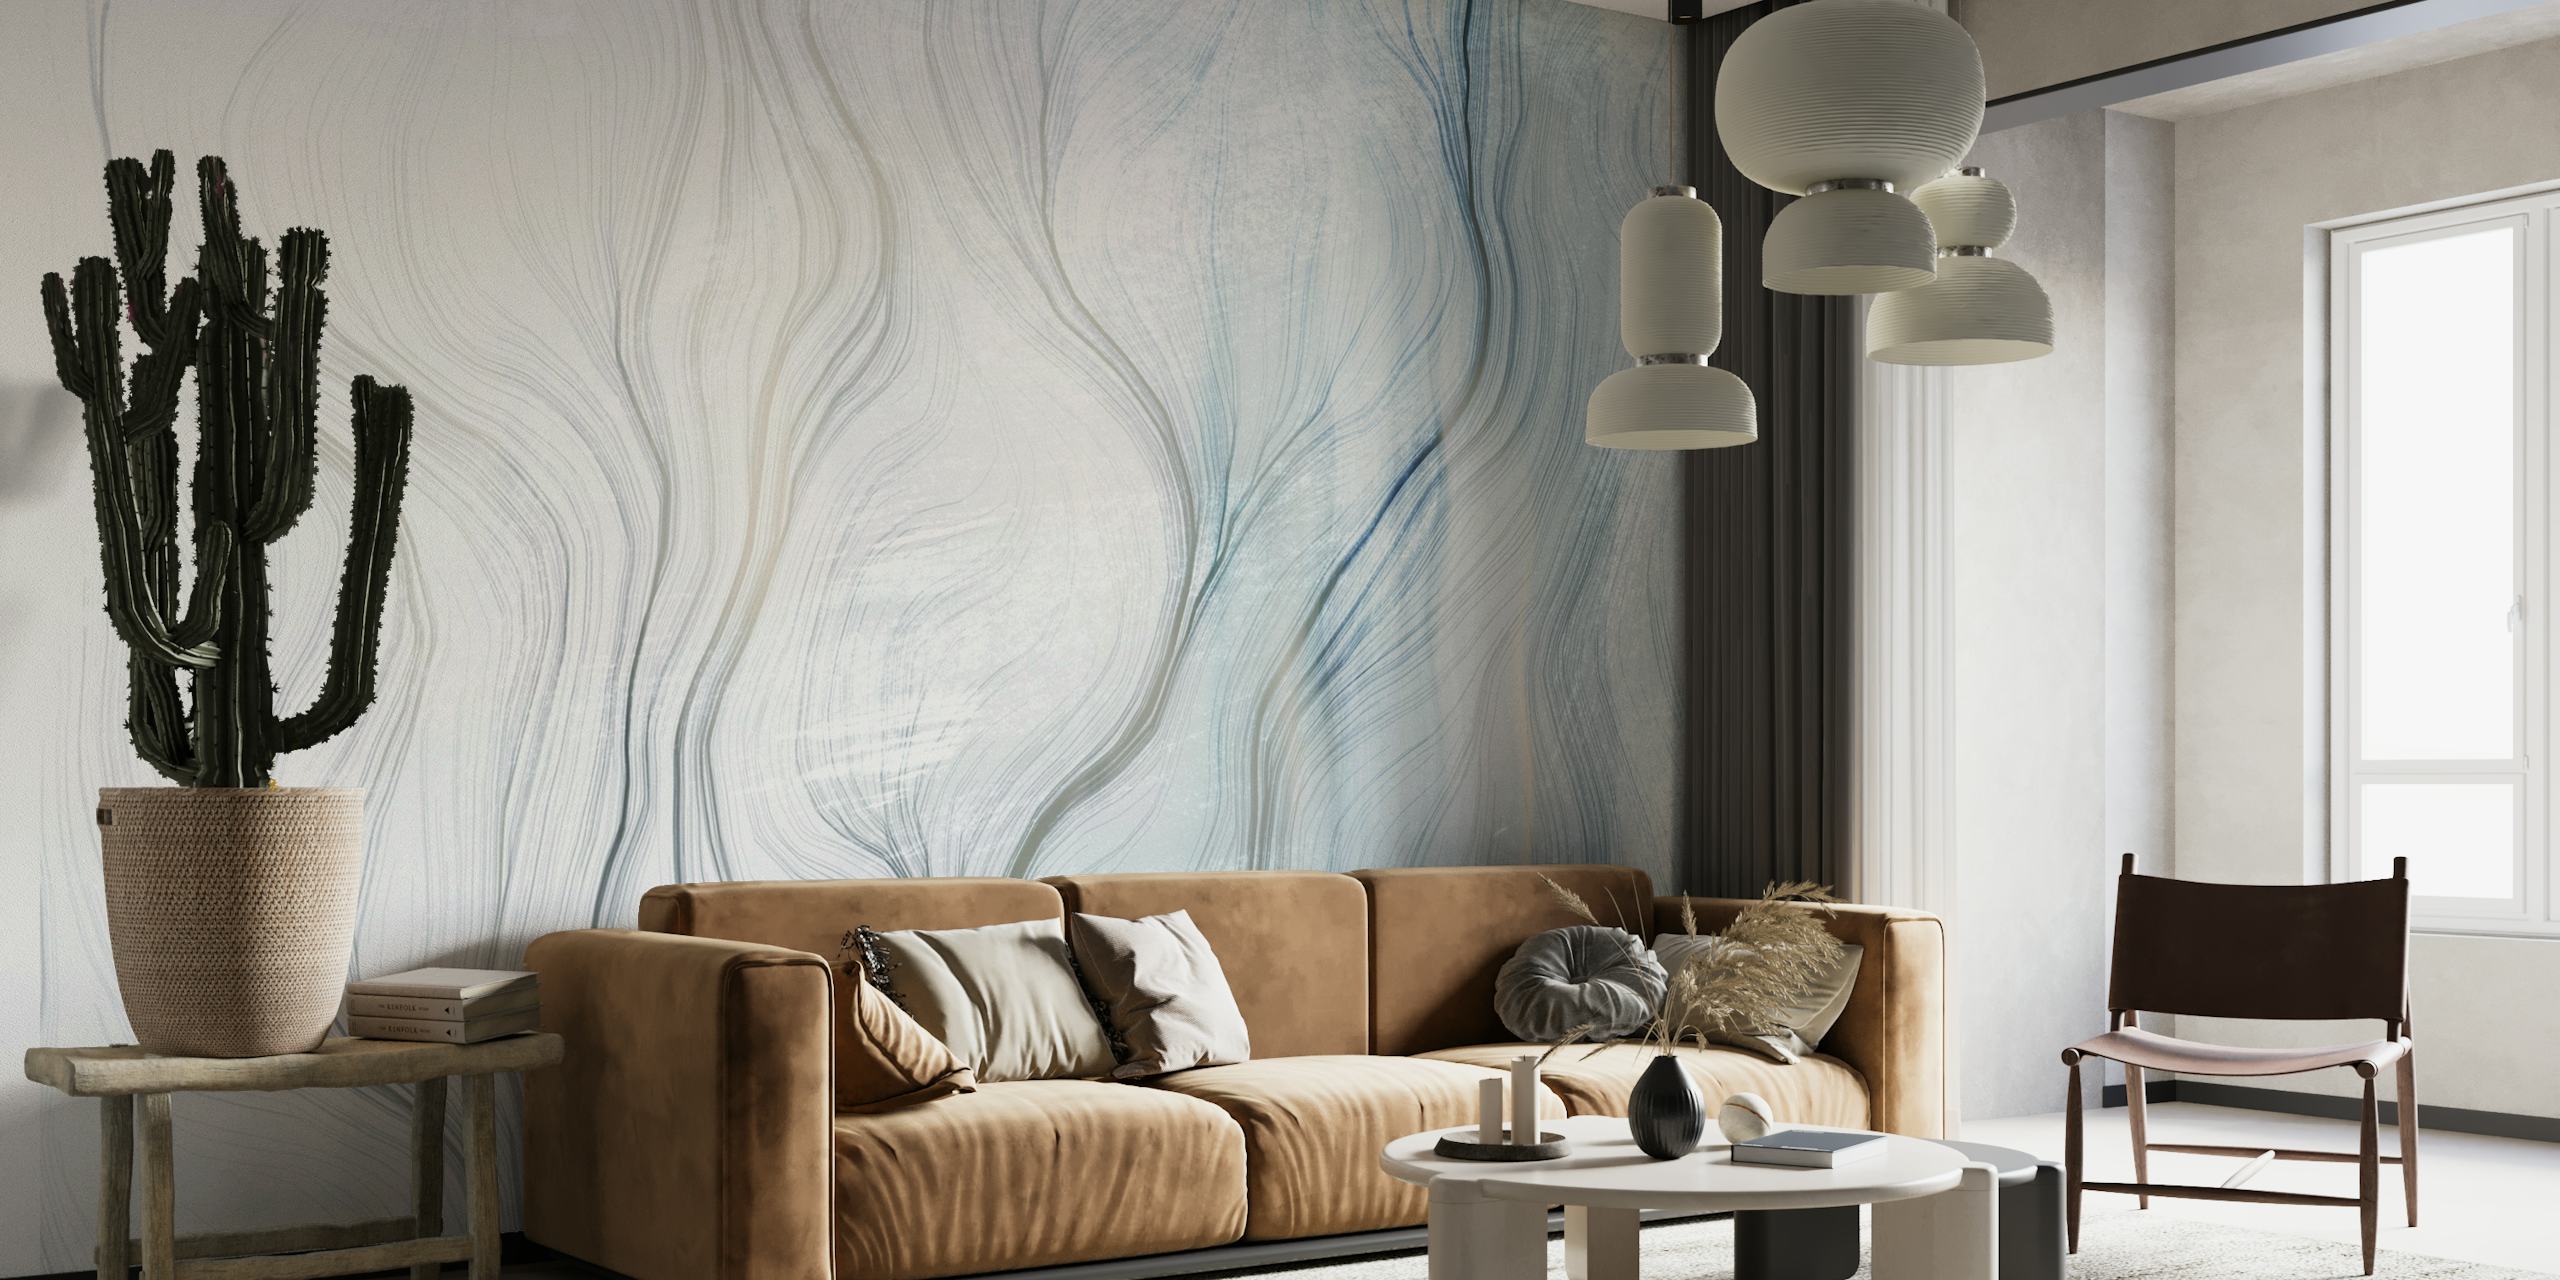 Abstract wall mural with soft curves and gradient shades of blue and gray, creating a tranquil ambiance